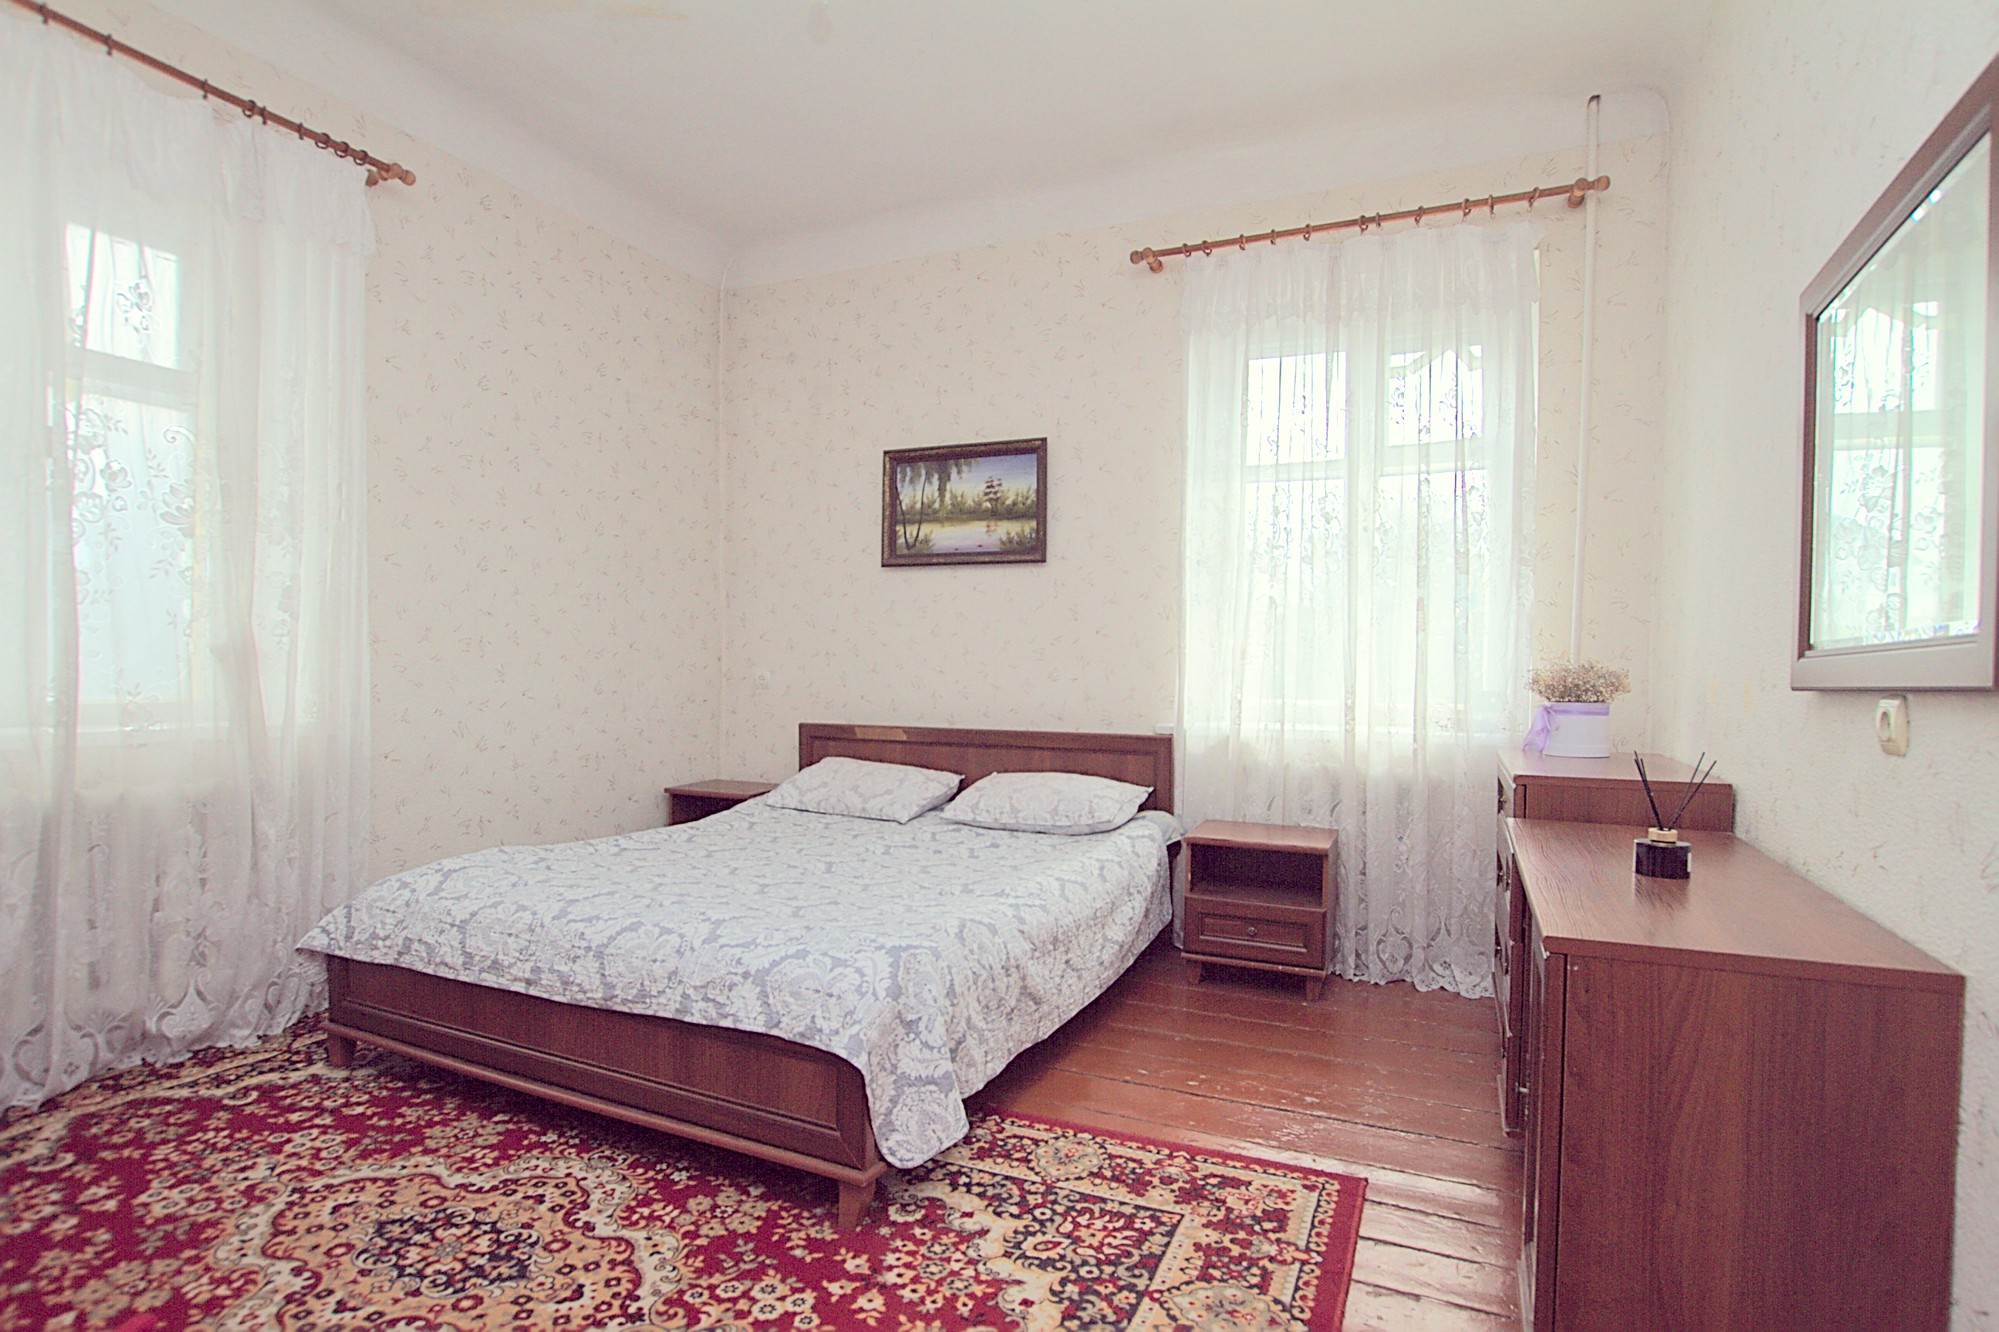 2 room apartment with privat parking: 2 rooms, 1 bedroom, 54 m²